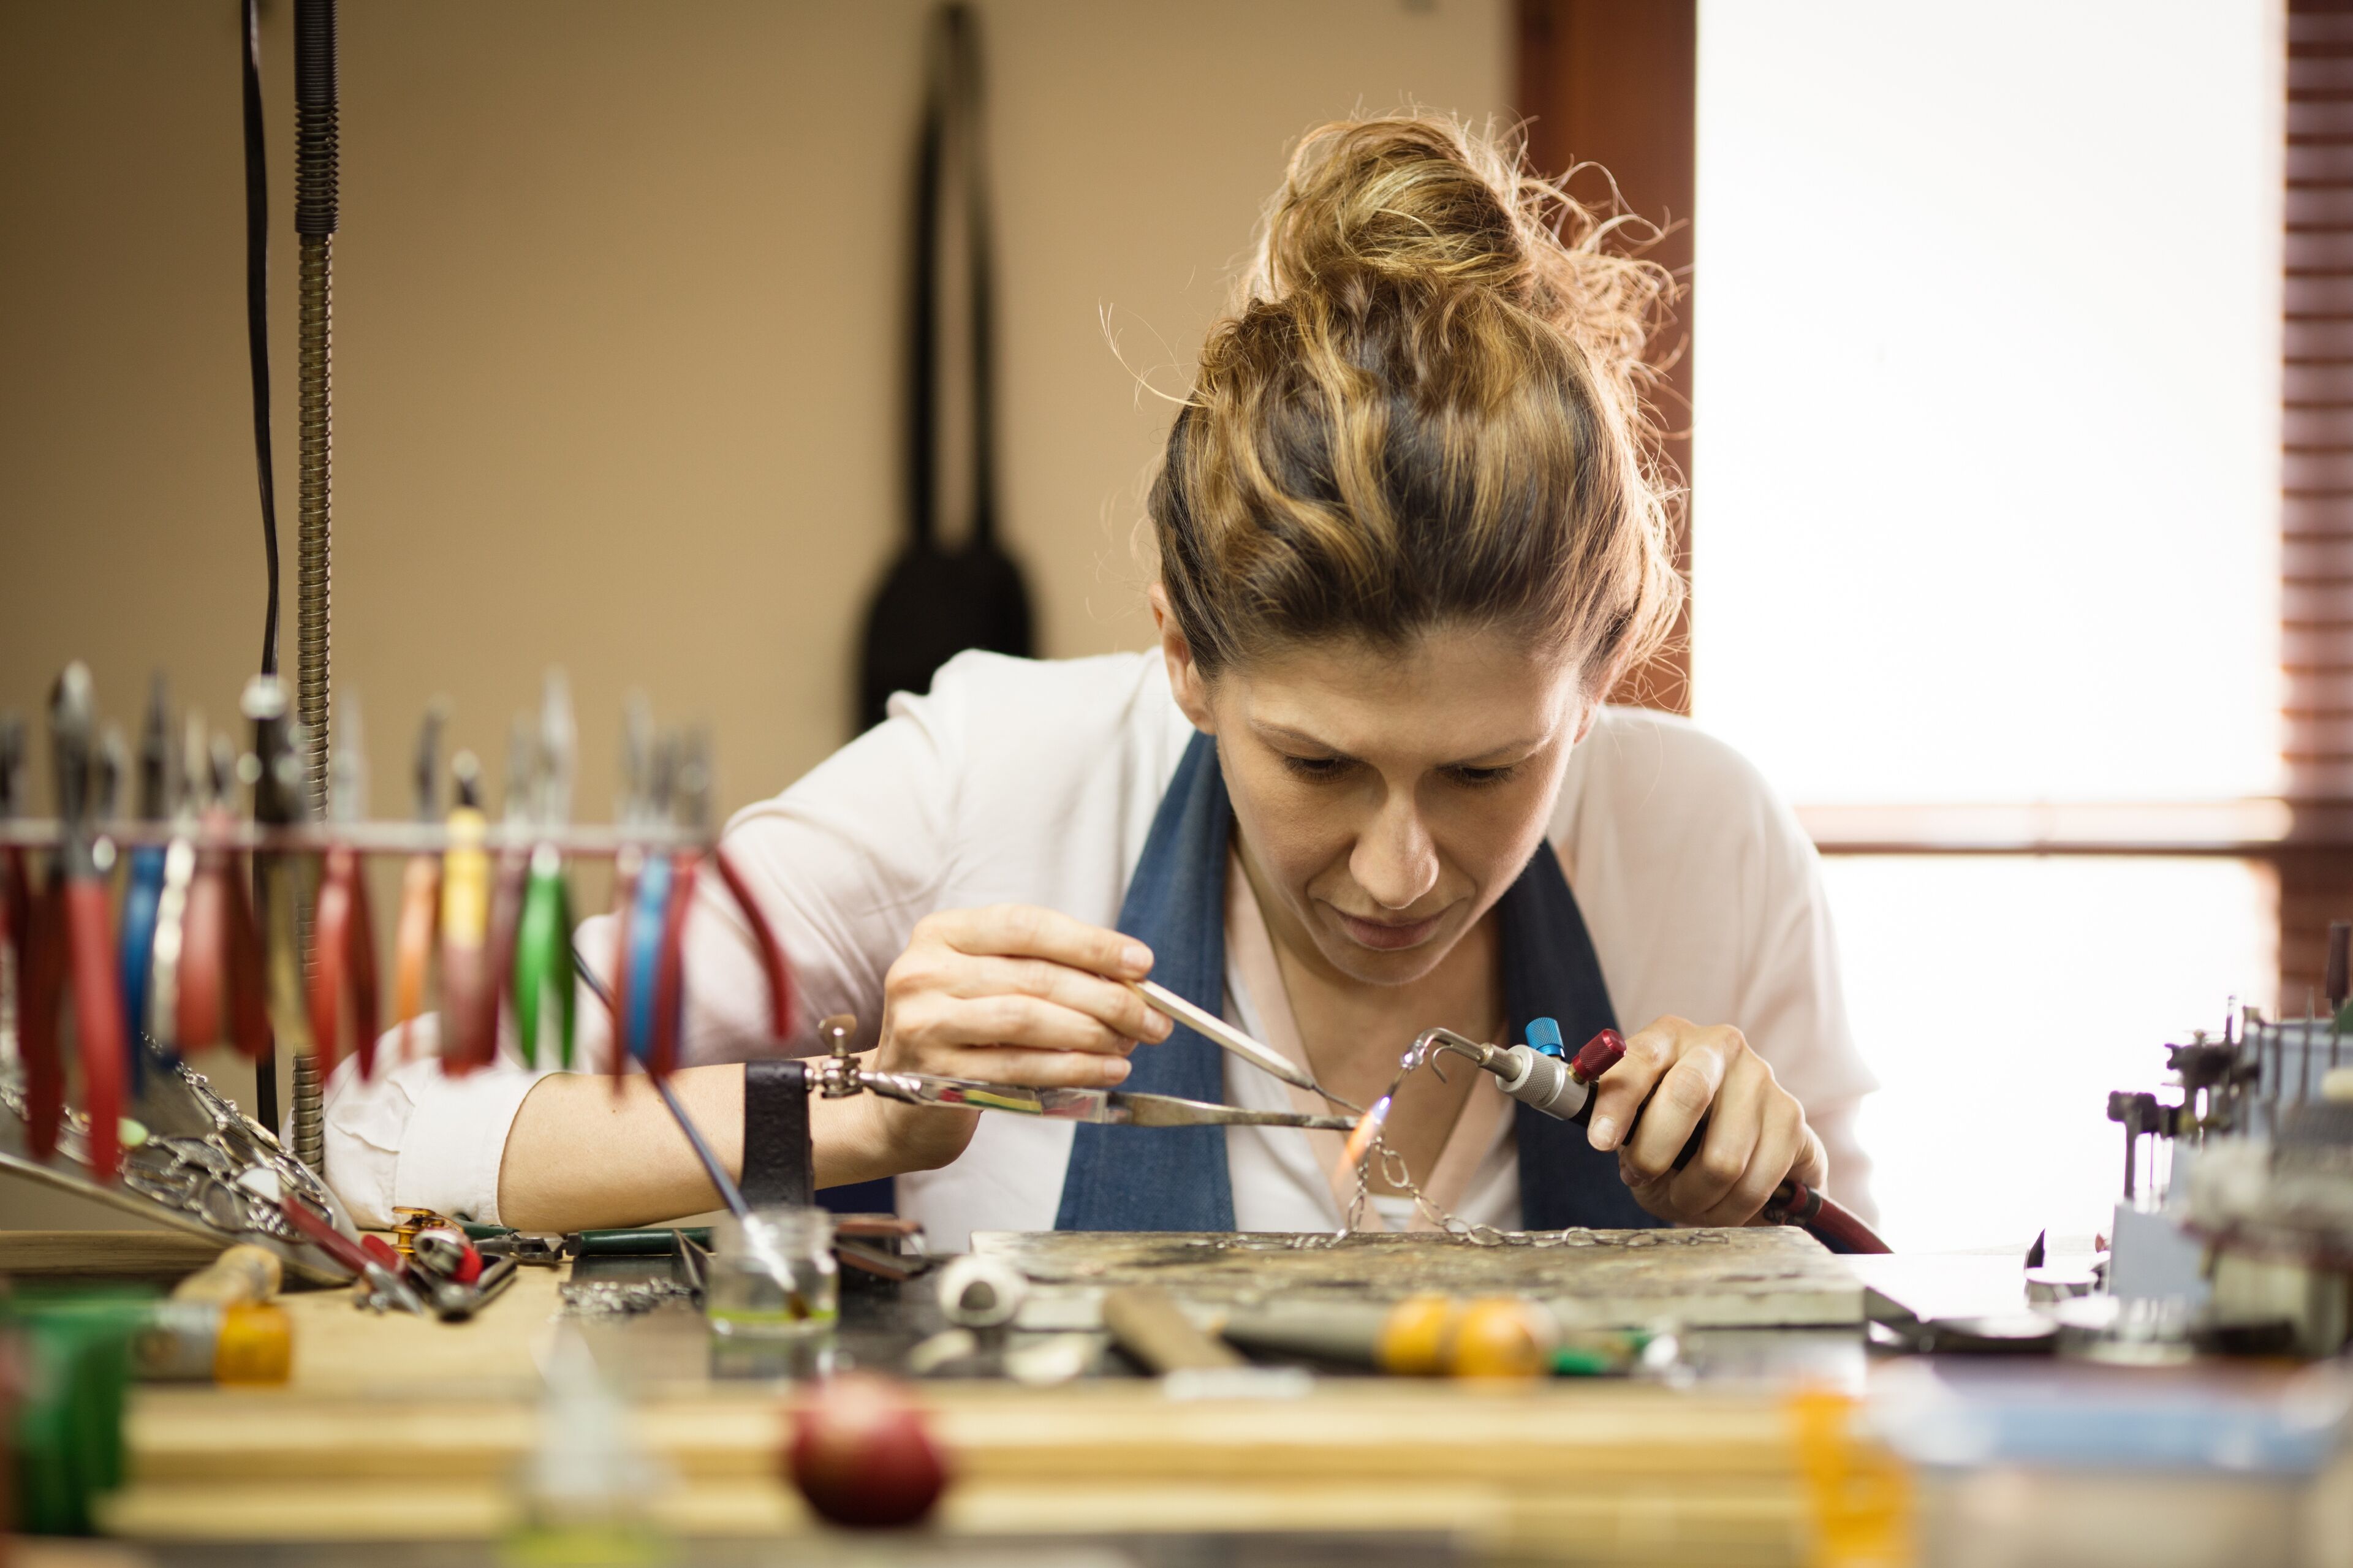 A focused female artisan soldering a piece of jewelry in a well-organized workshop.